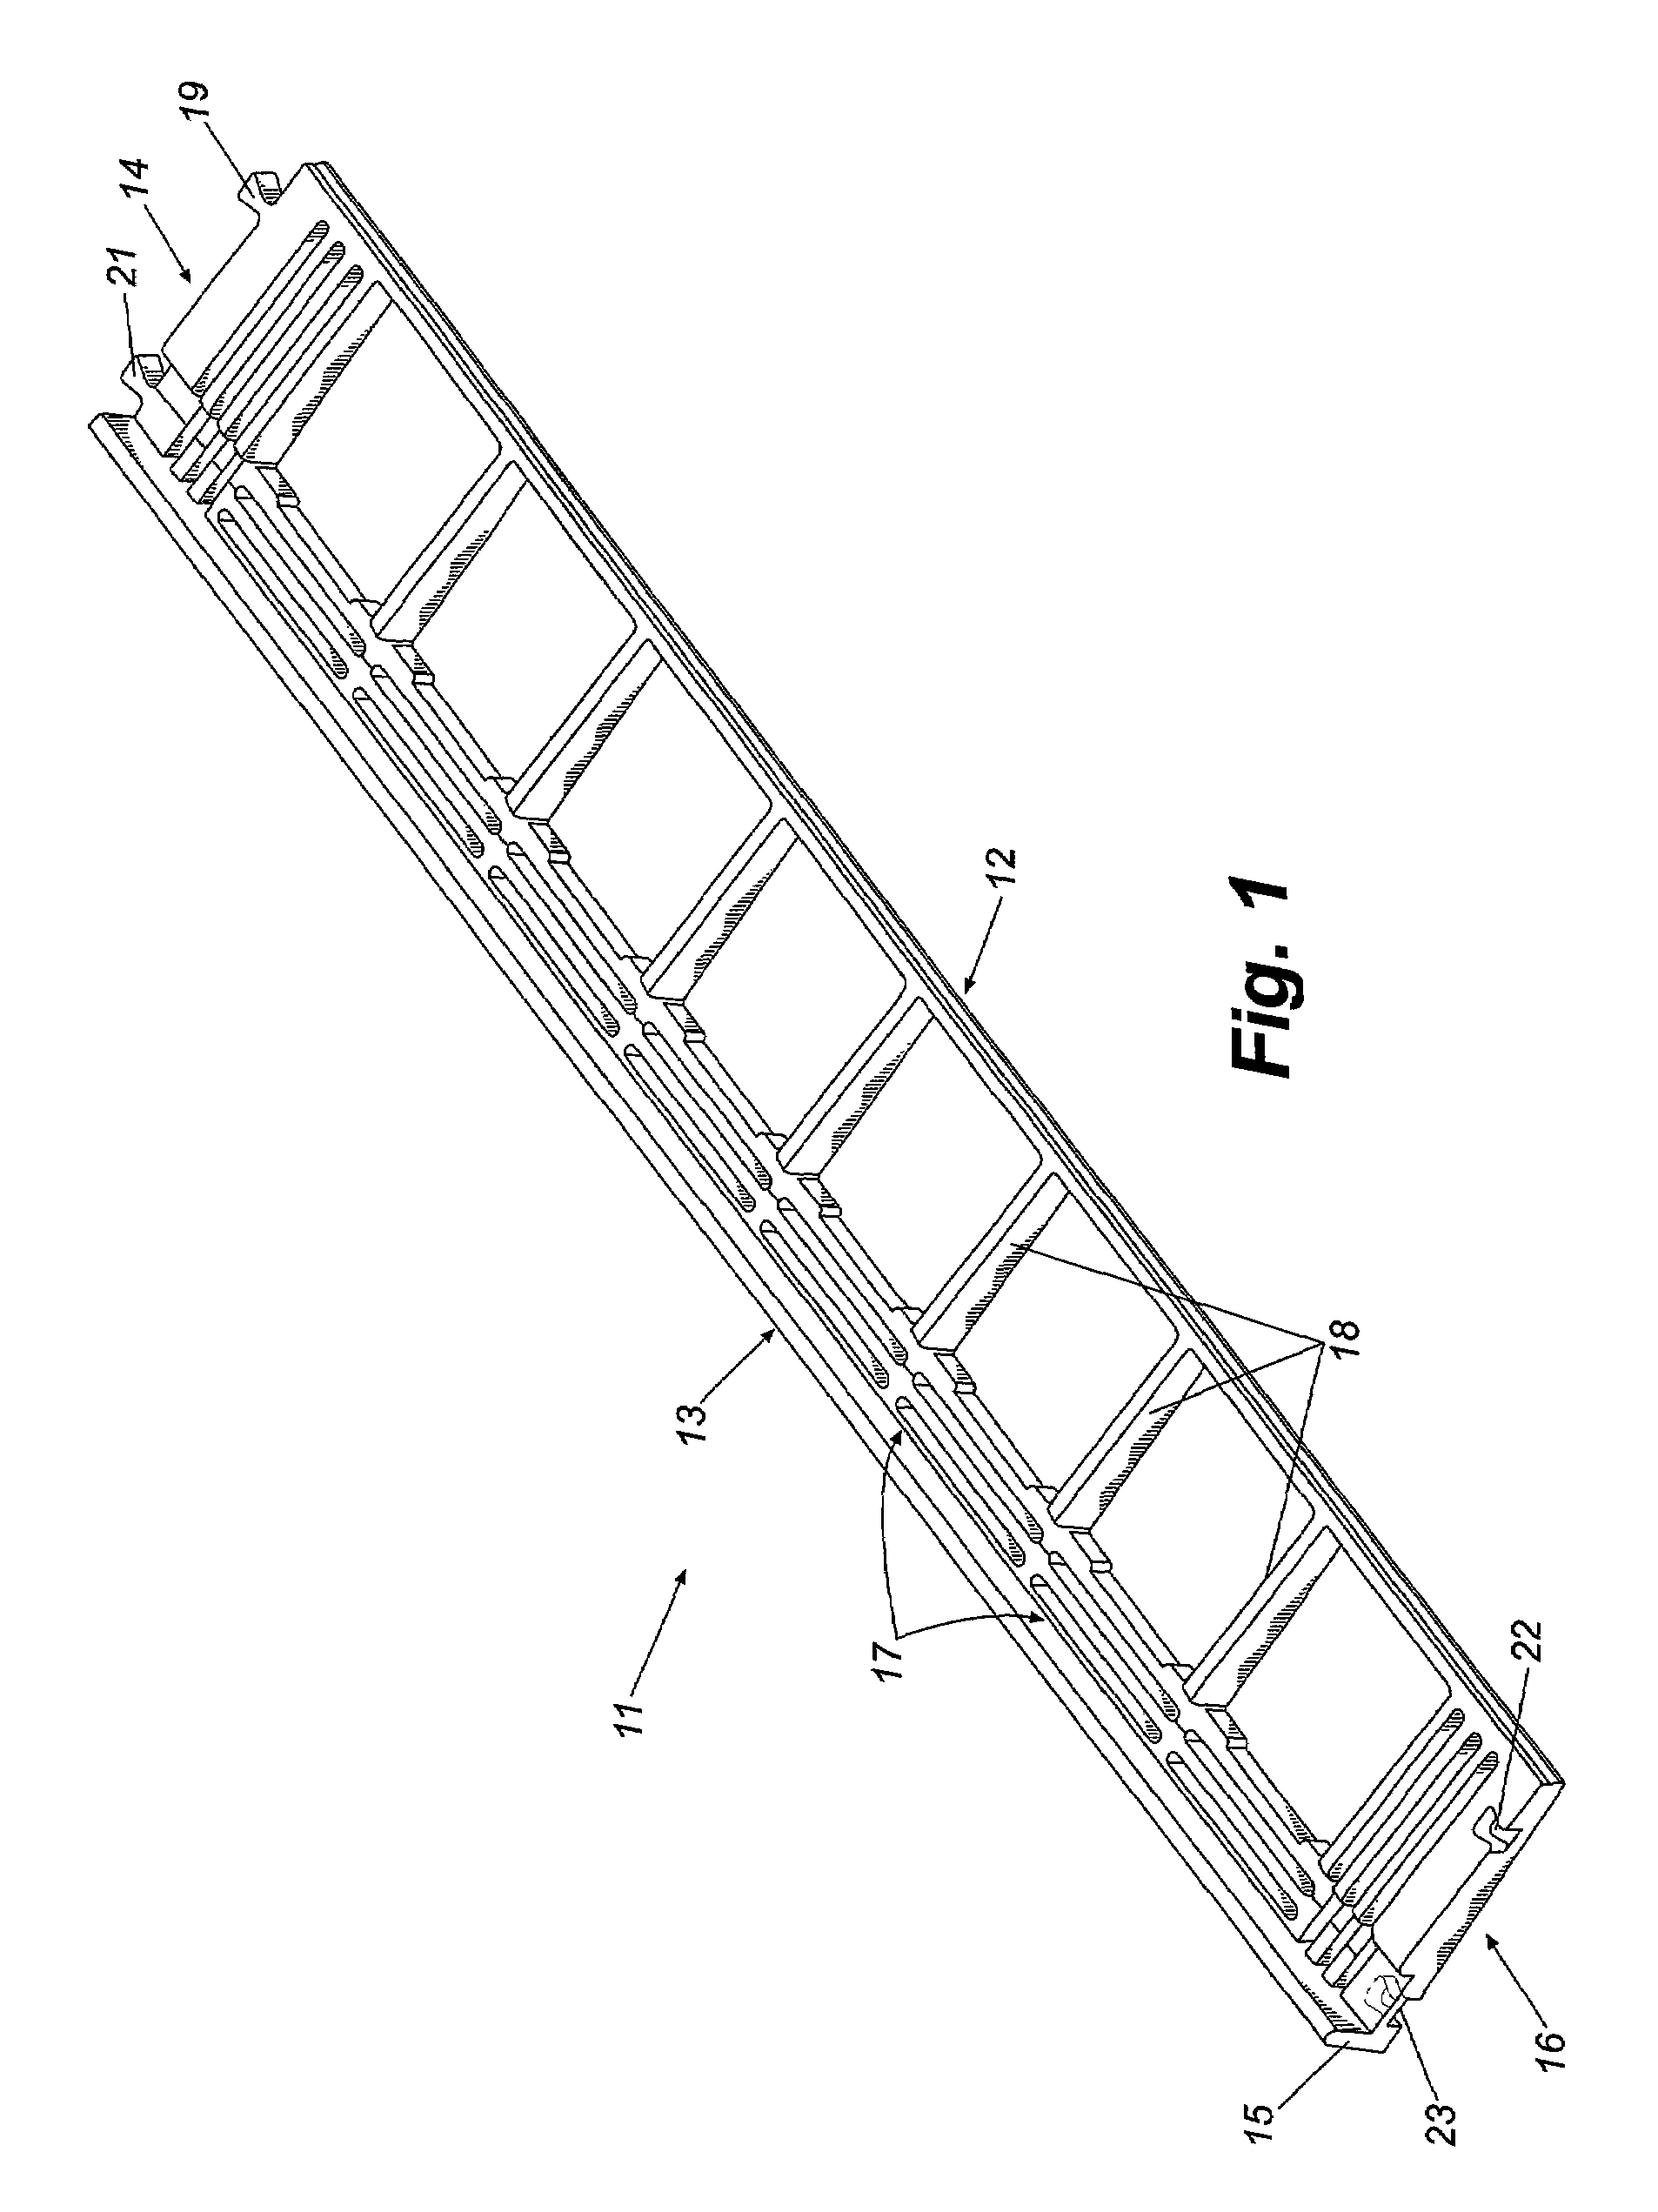 Continuous threshold assembly with modular interlocking substrate sections